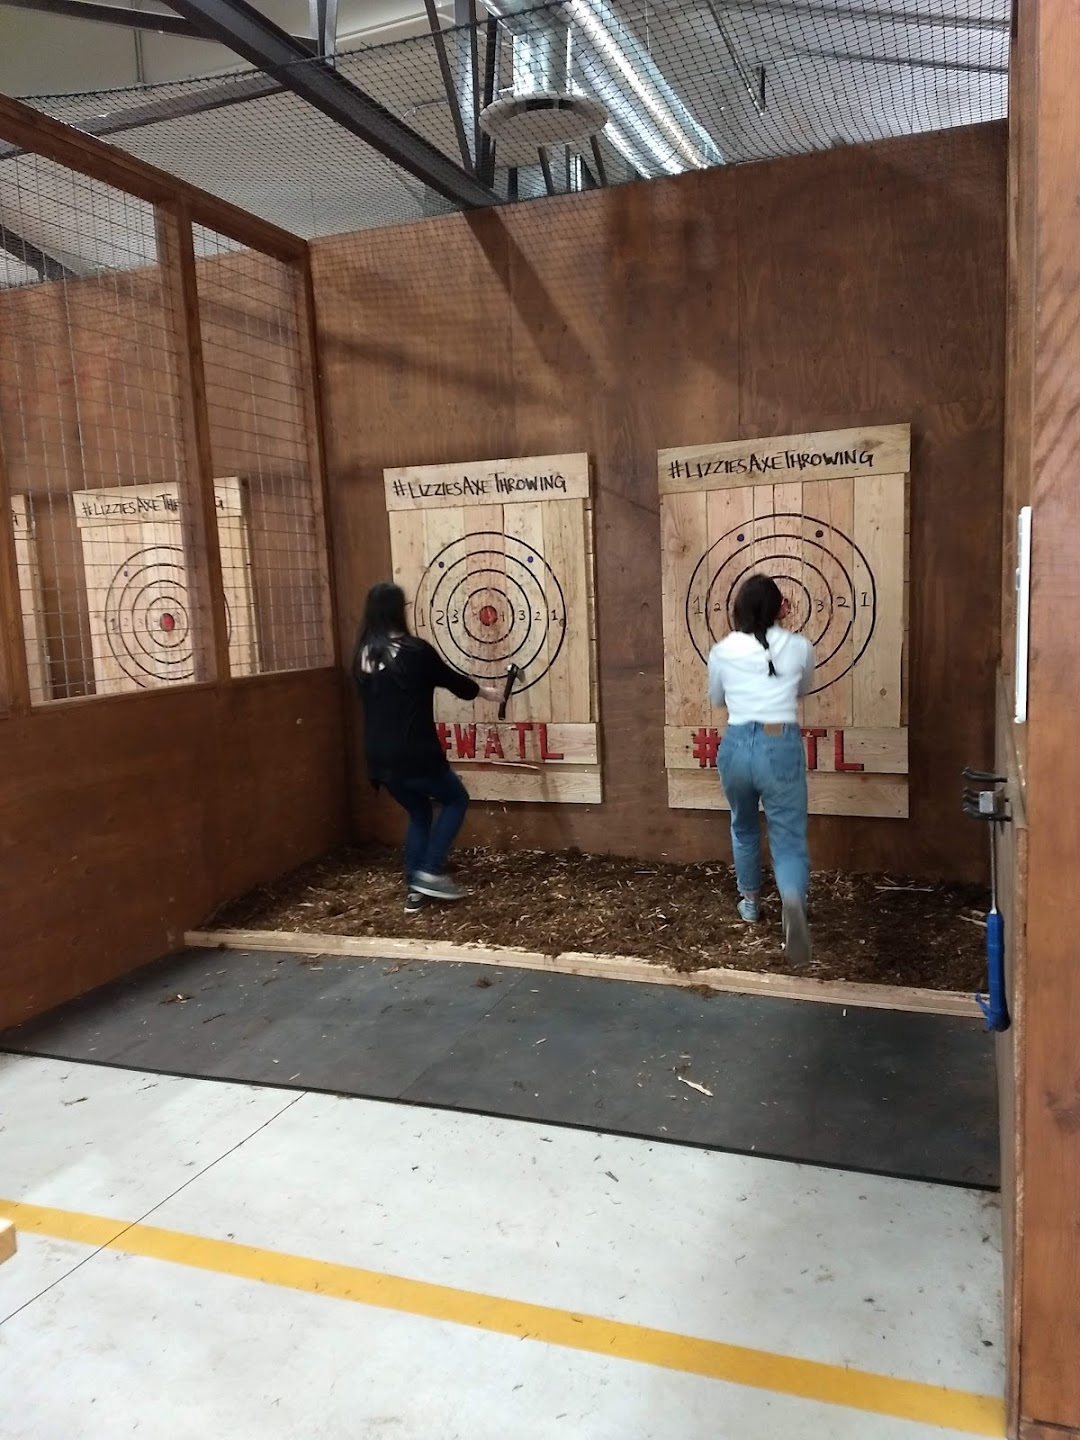 Lizzies Axe Throwing